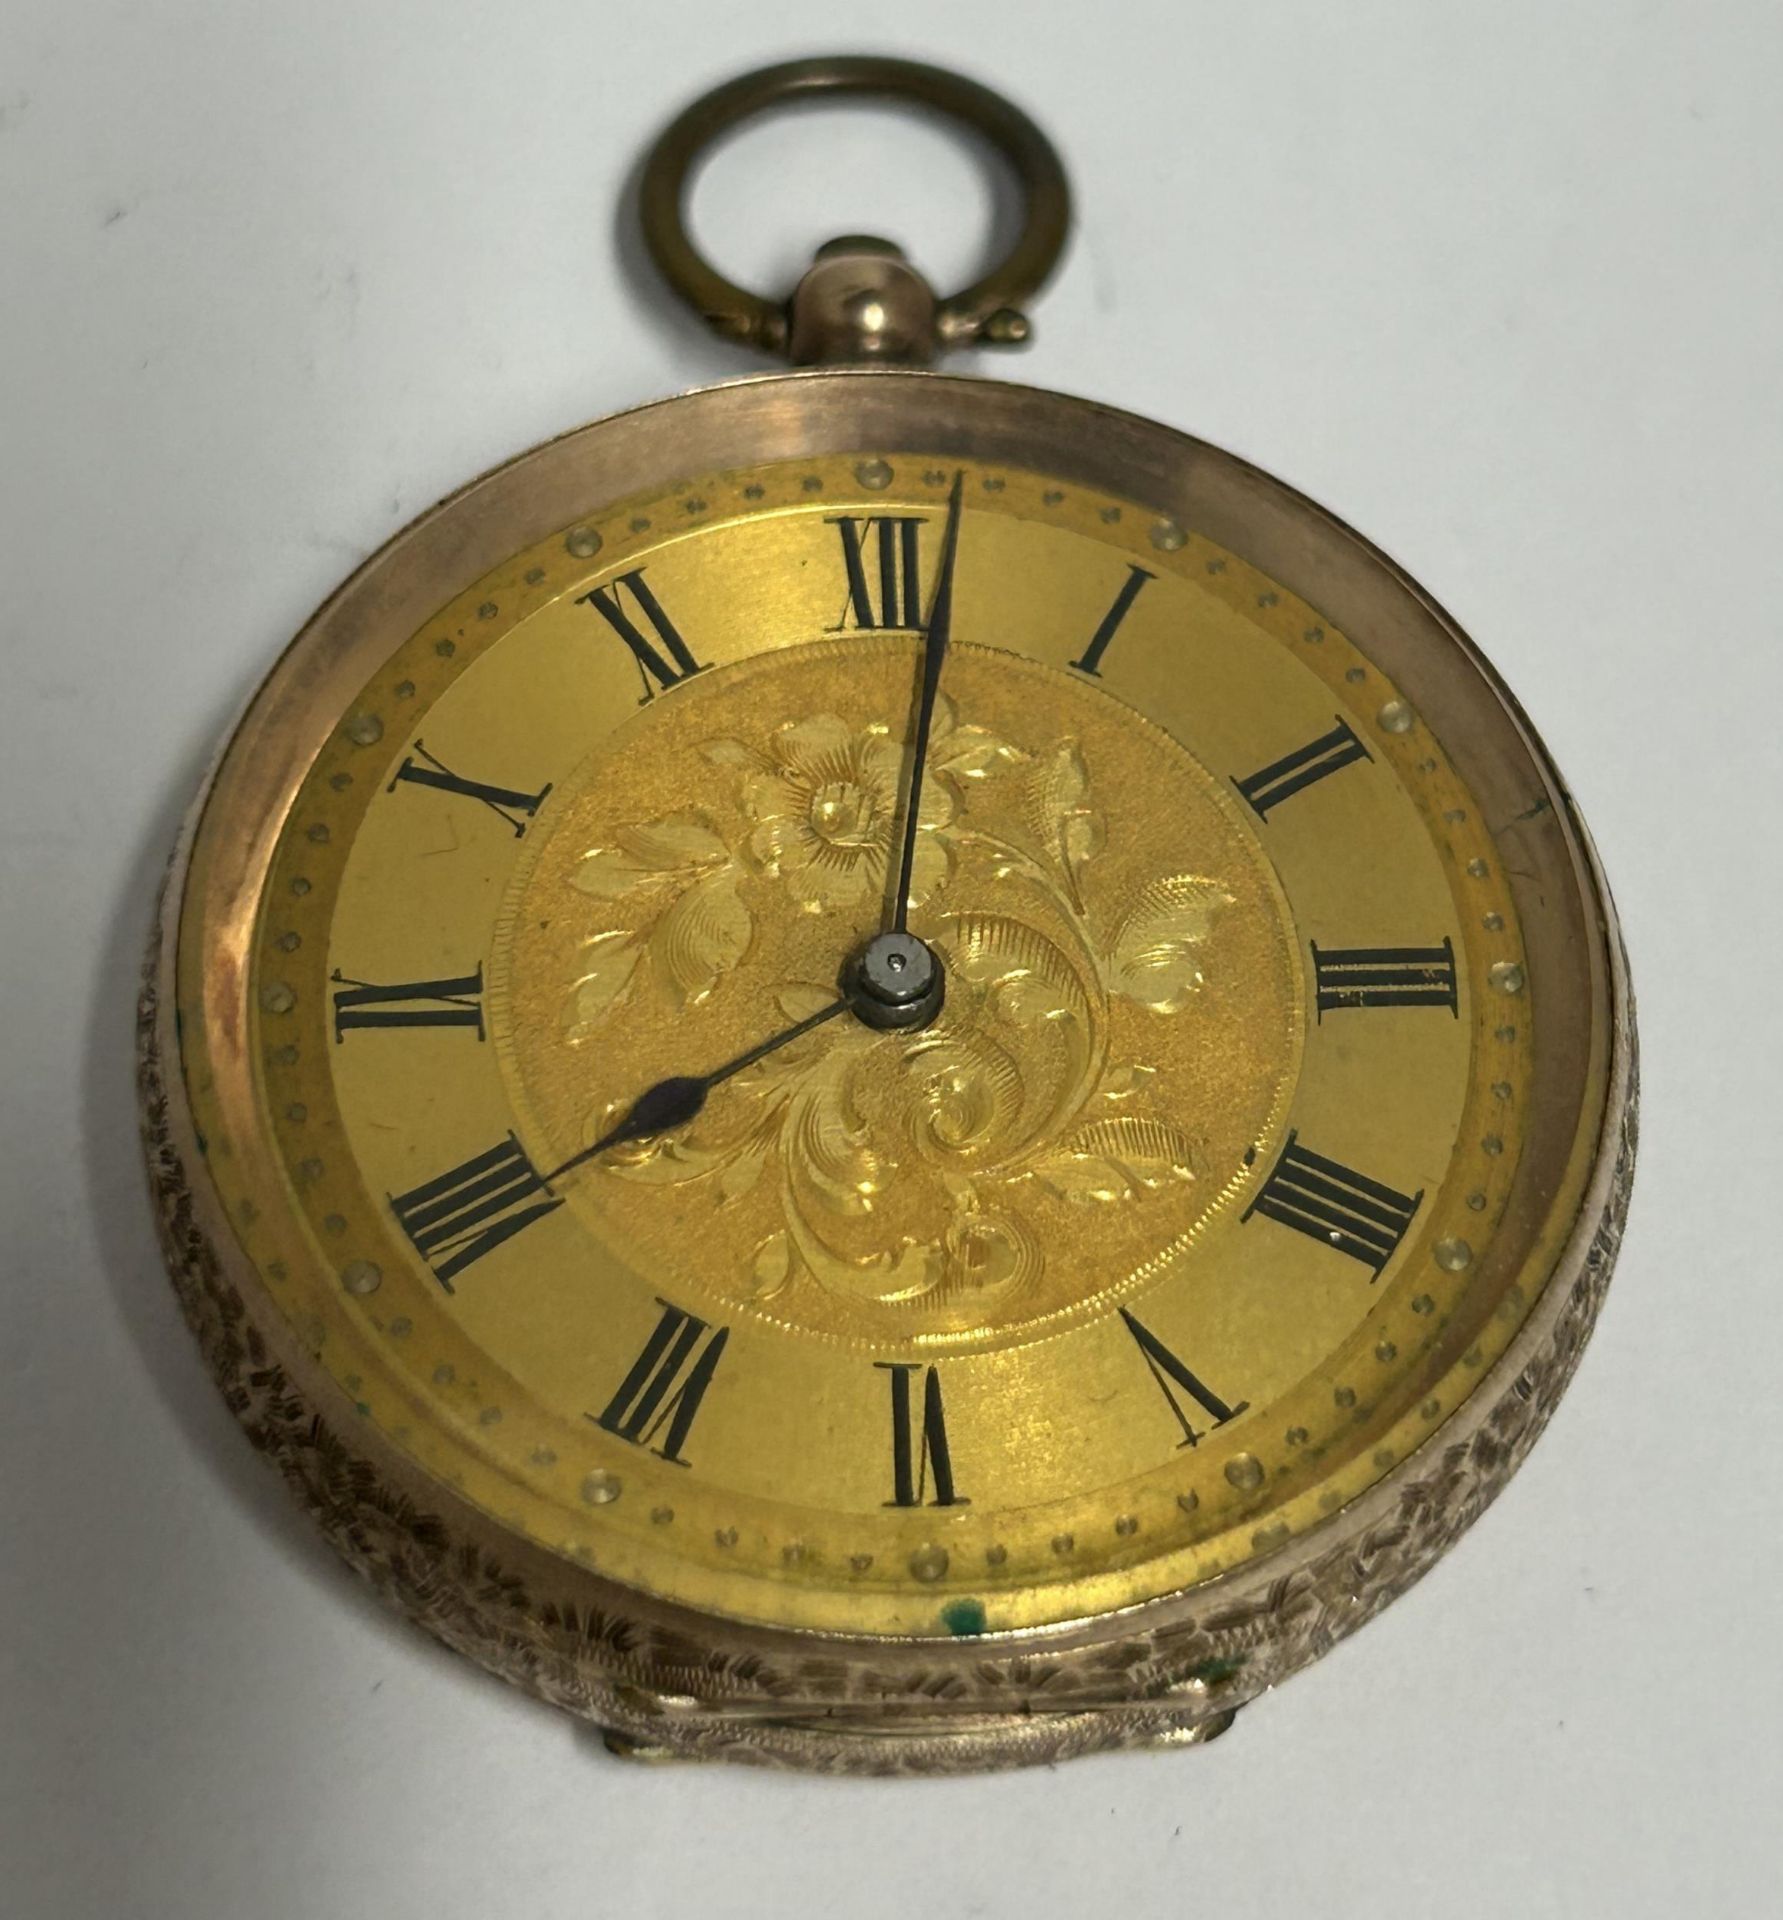 A 9CT YELLOW GOLD LADIES OPEN FACE, KEY WIND POCKET WATCH WITH ETCHED FLORAL DIAL, GROSS WEIGHT 34.